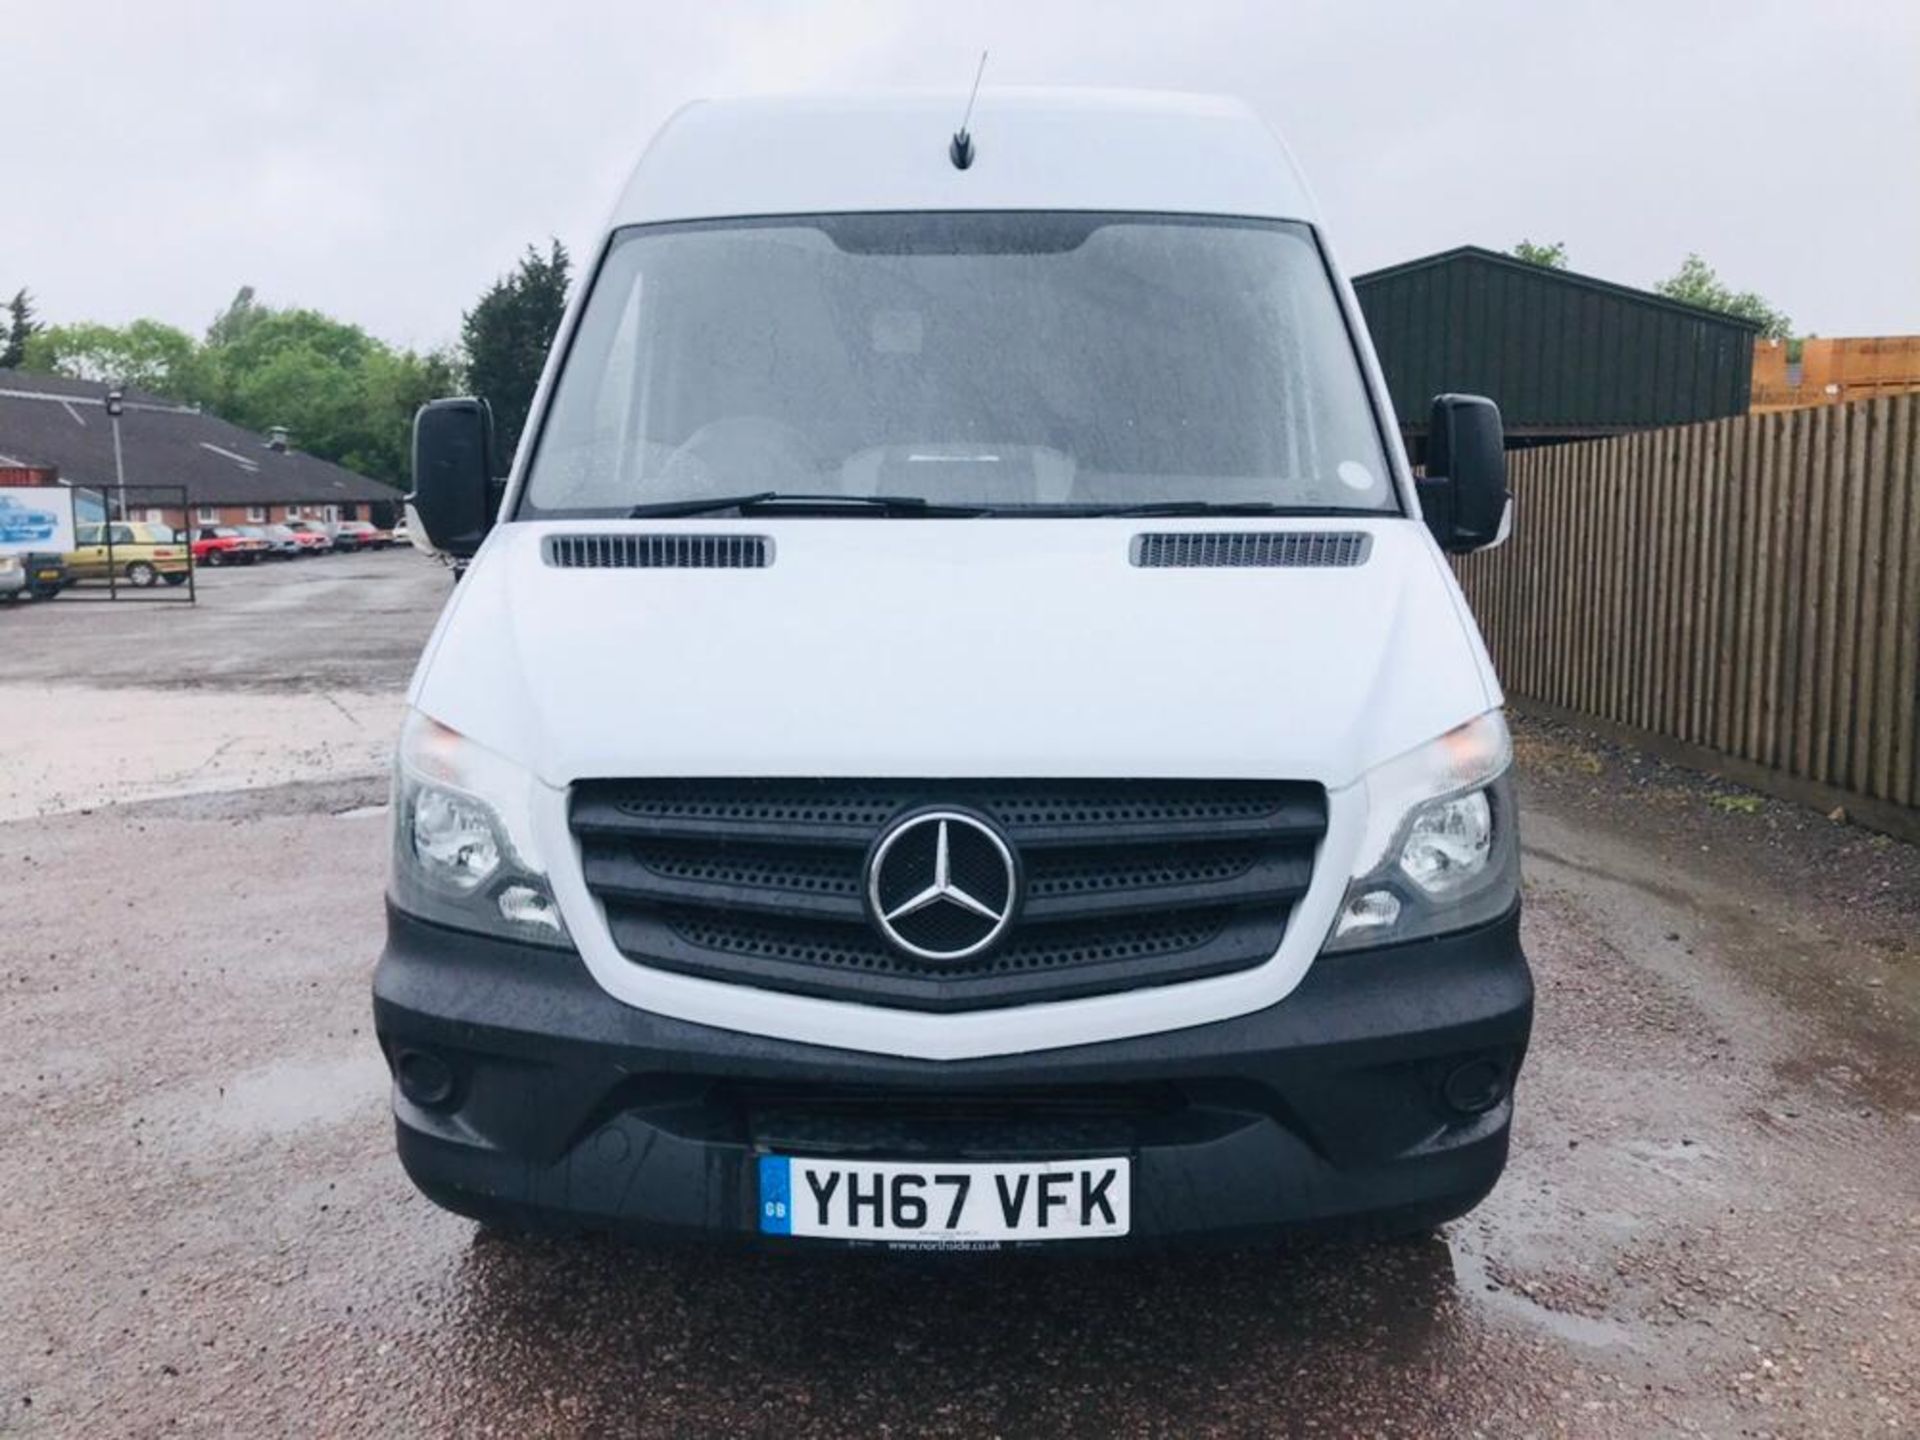 (ON SALE) MERCEDES SPRINTER 314CDI "140BHP" LWB (2018 MODEL) EURO 6 - LONDON COMPLIANT-DONT MISS OUT - Image 2 of 19